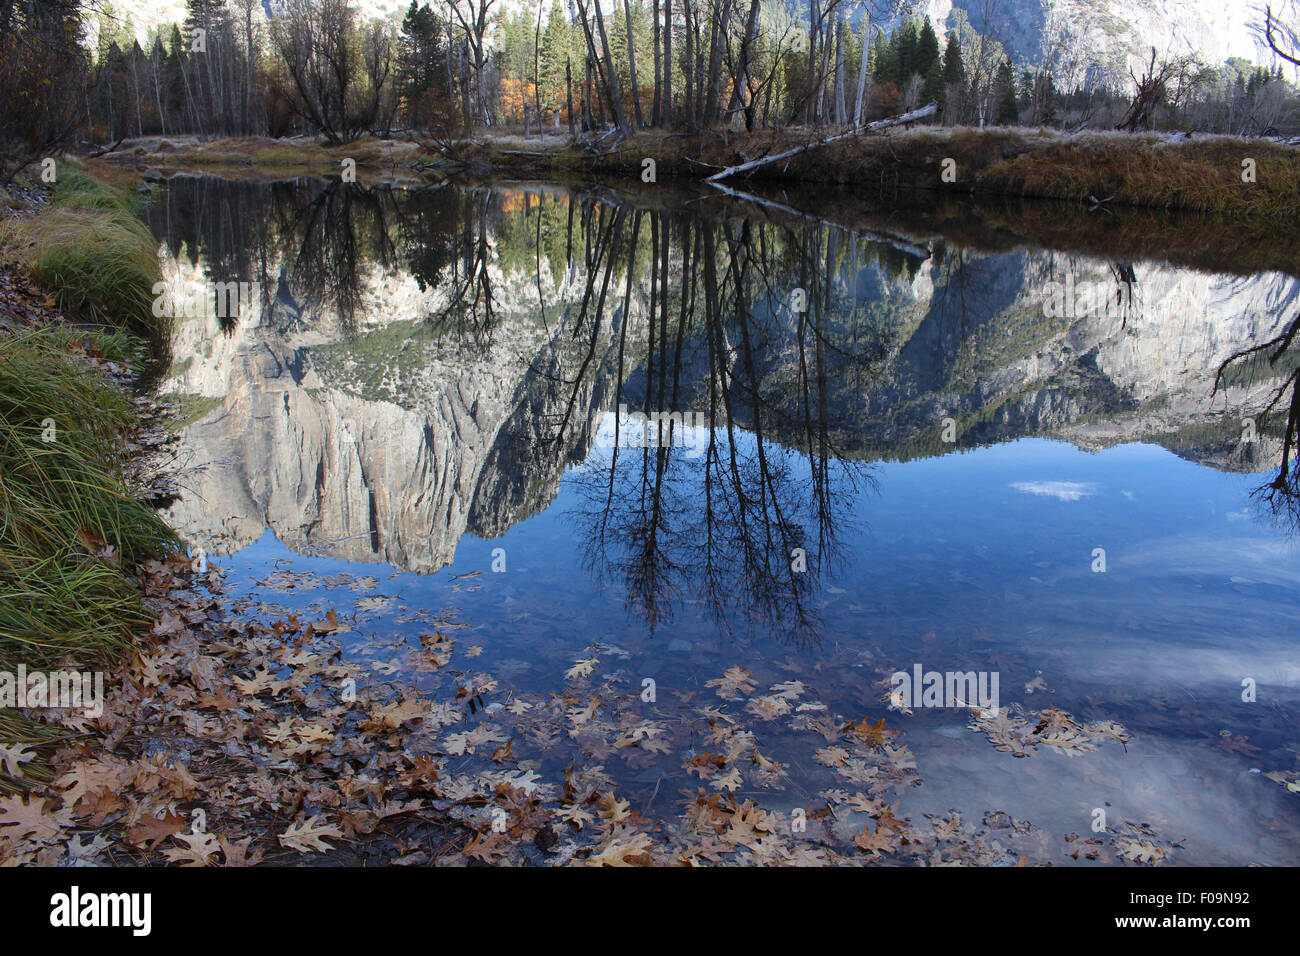 Morning Reflections in Merced River at the Swinging Bridge. Stock Photo